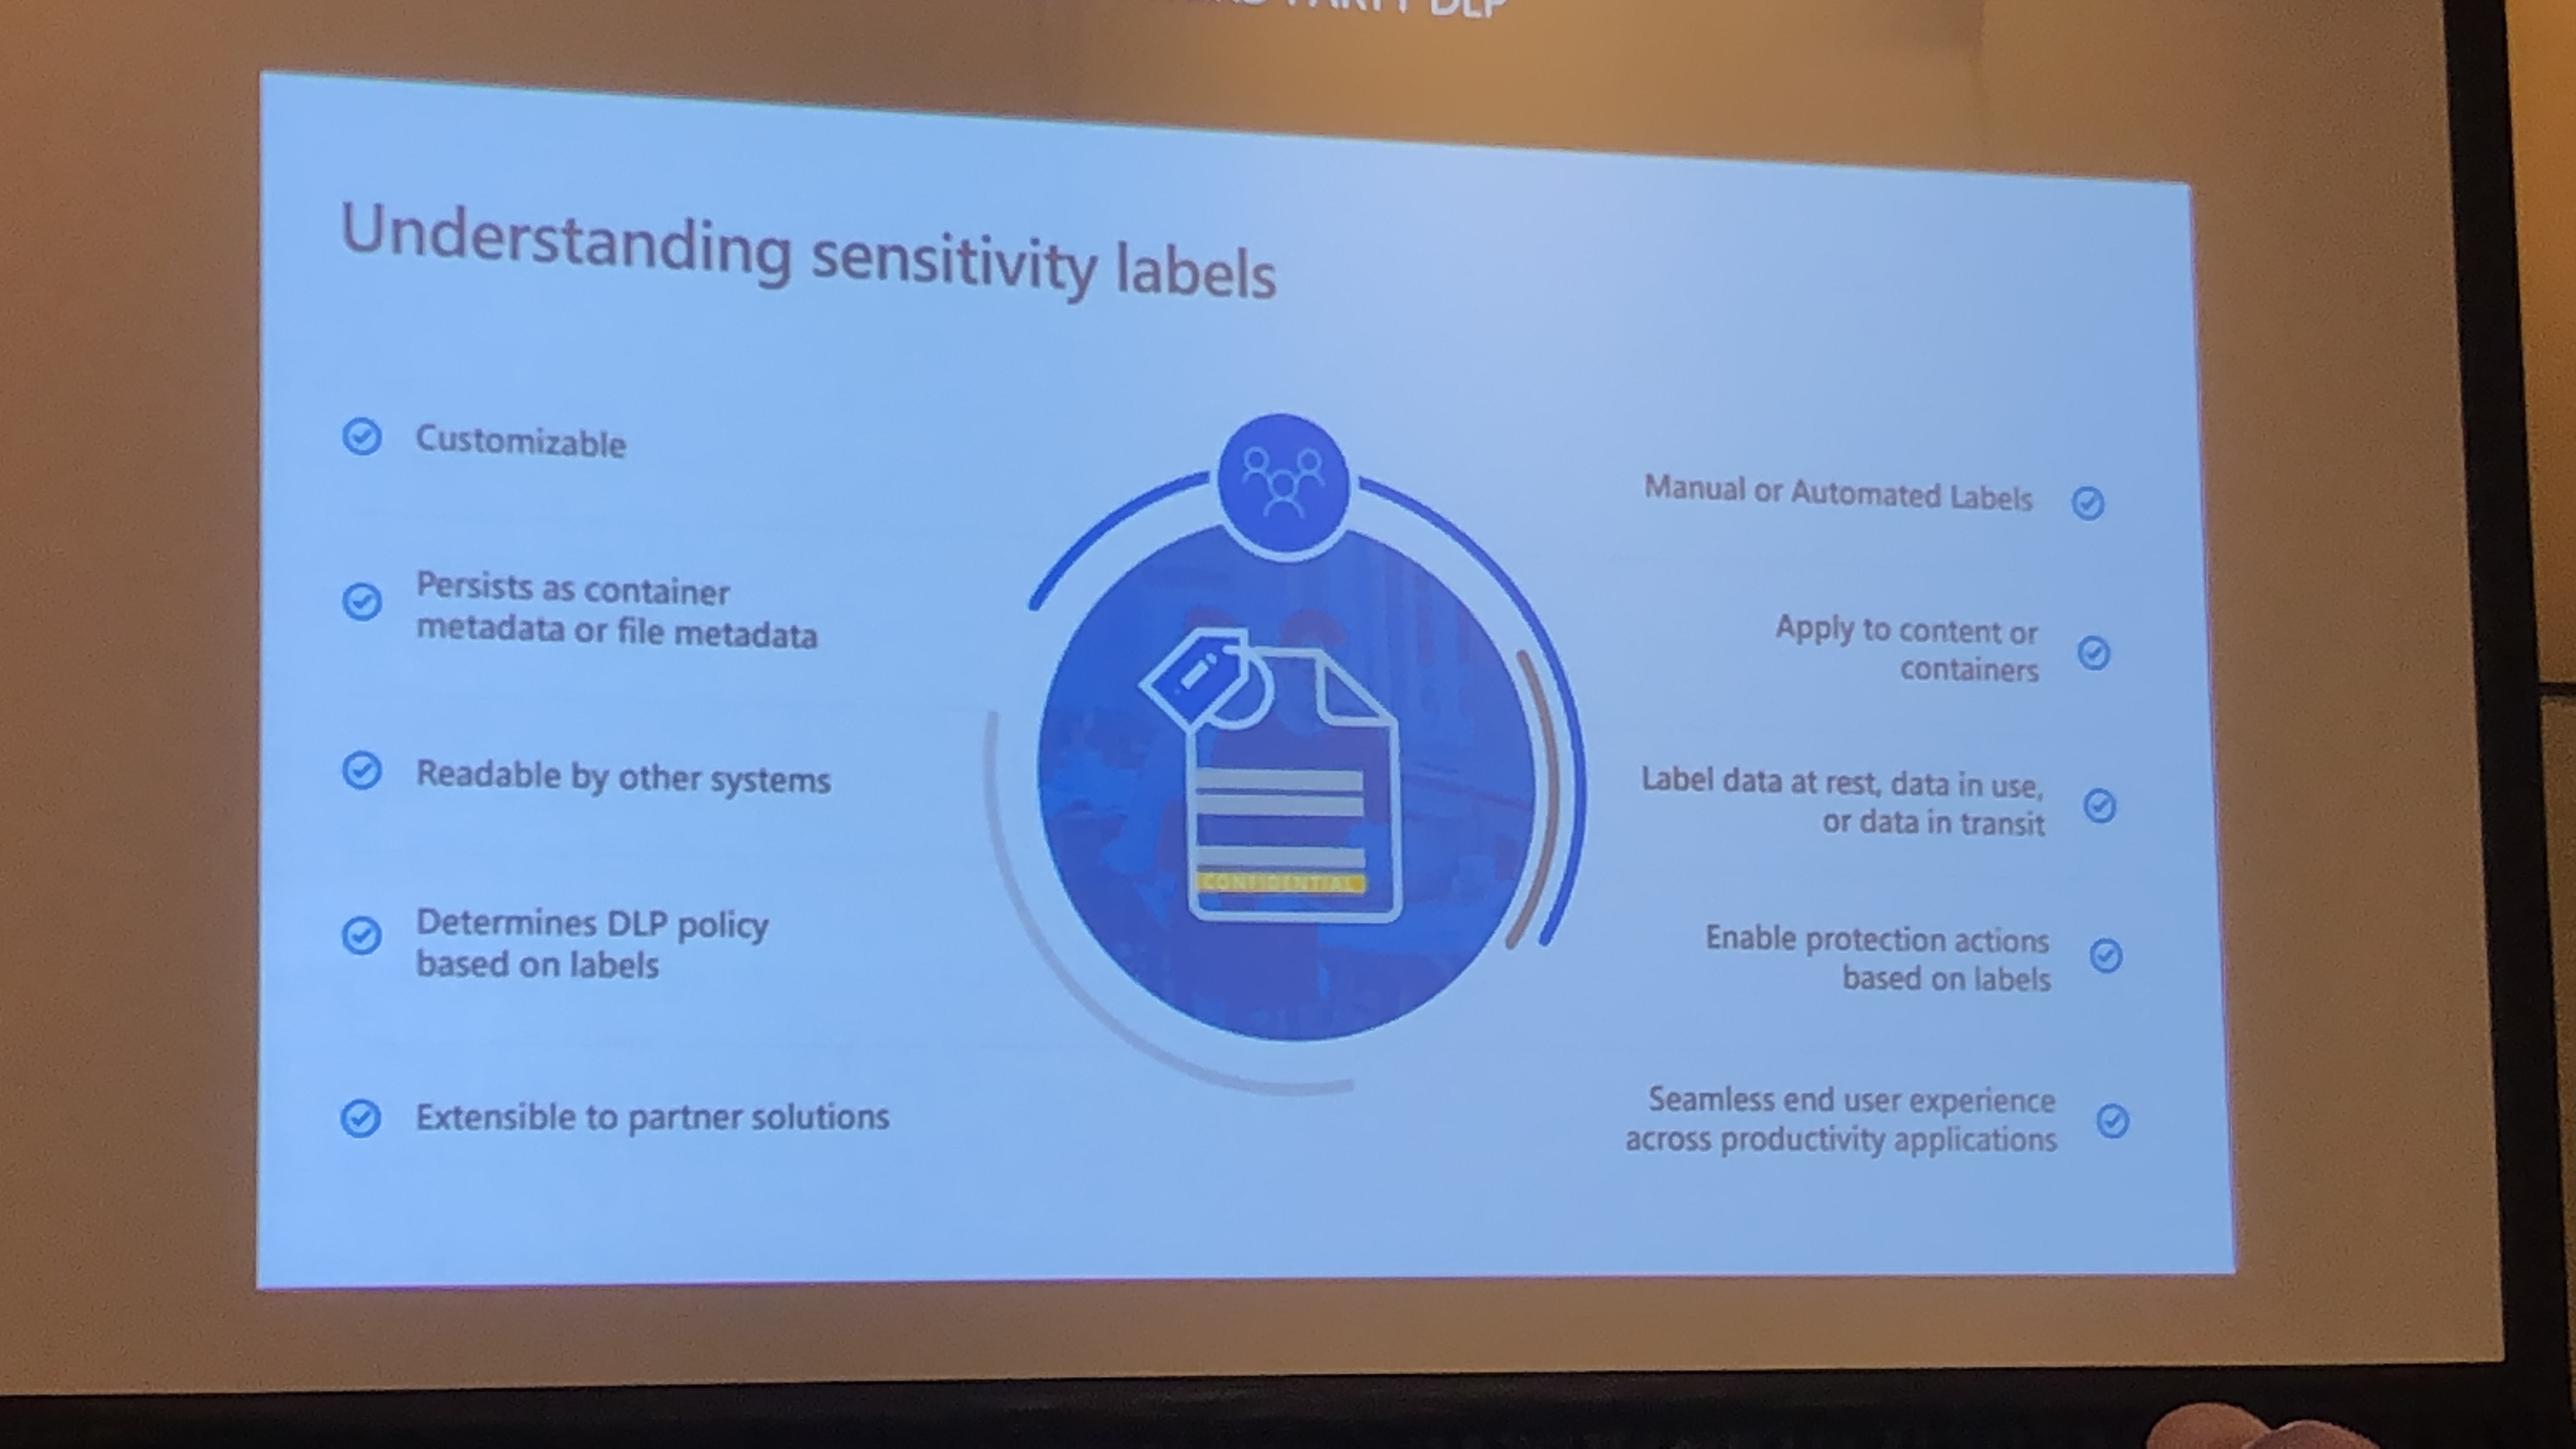 An overview of sensitivity labels